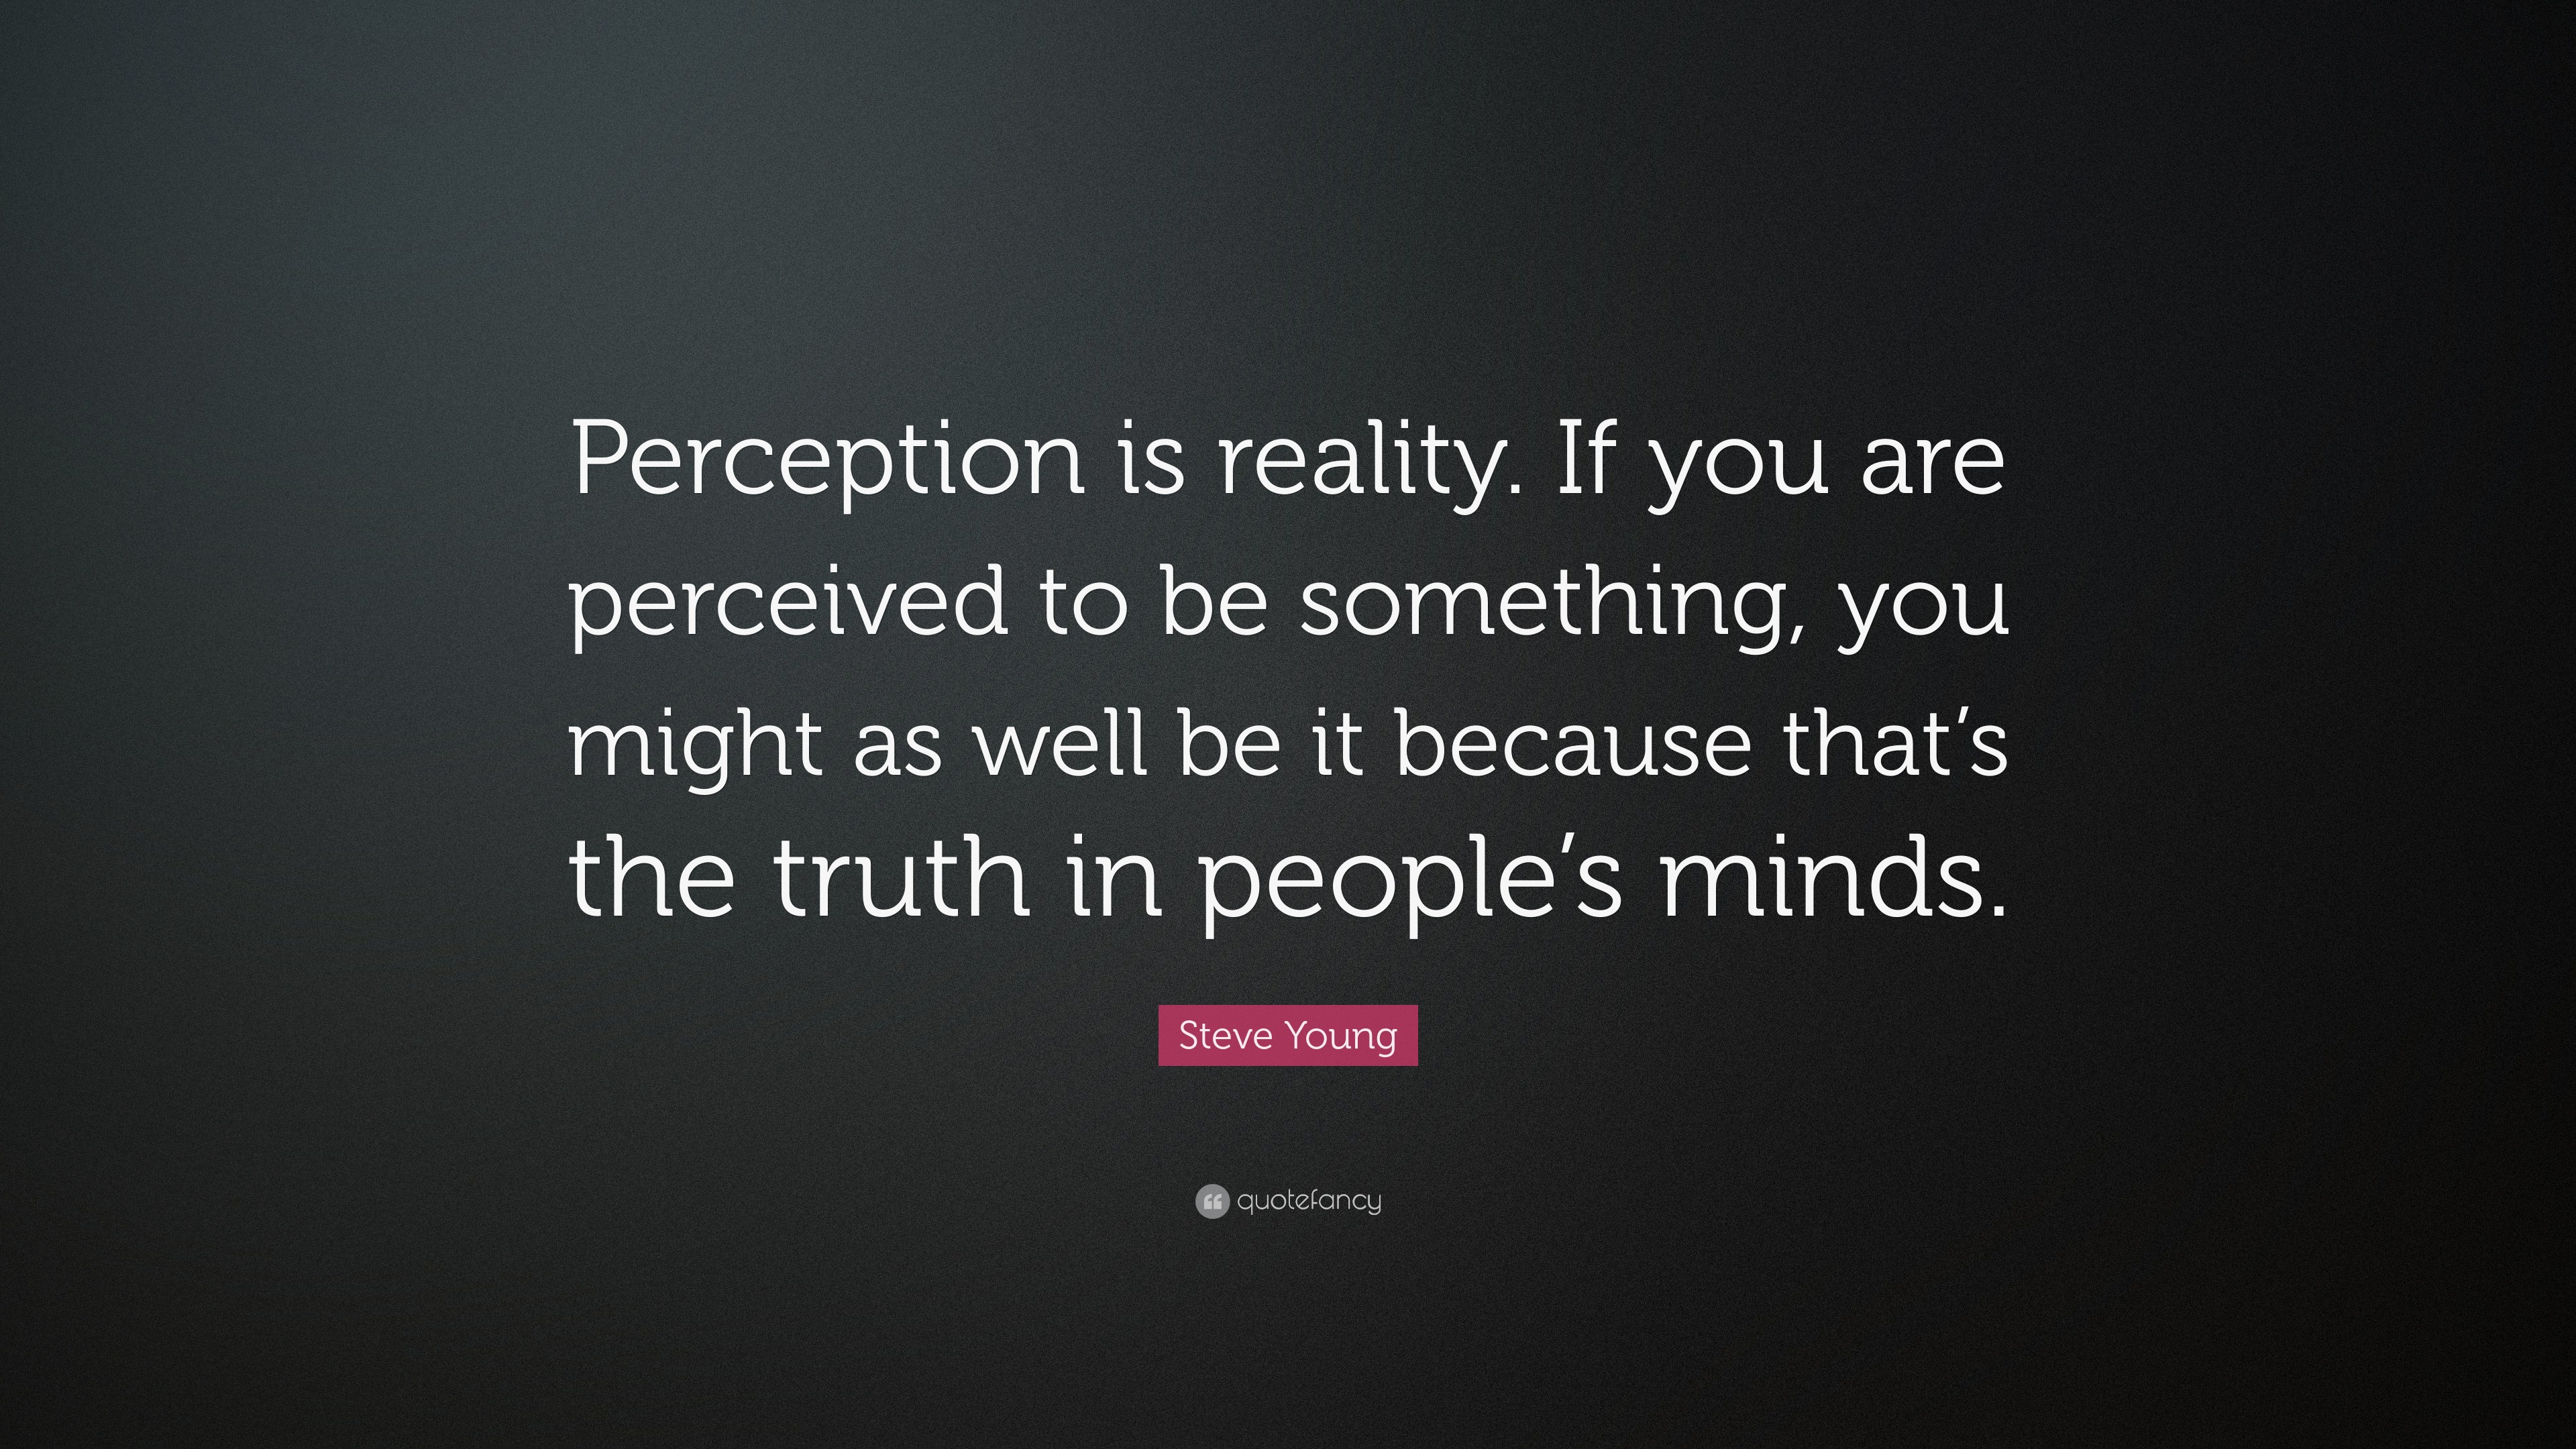 Steve Young Quote “Perception is reality. If you are